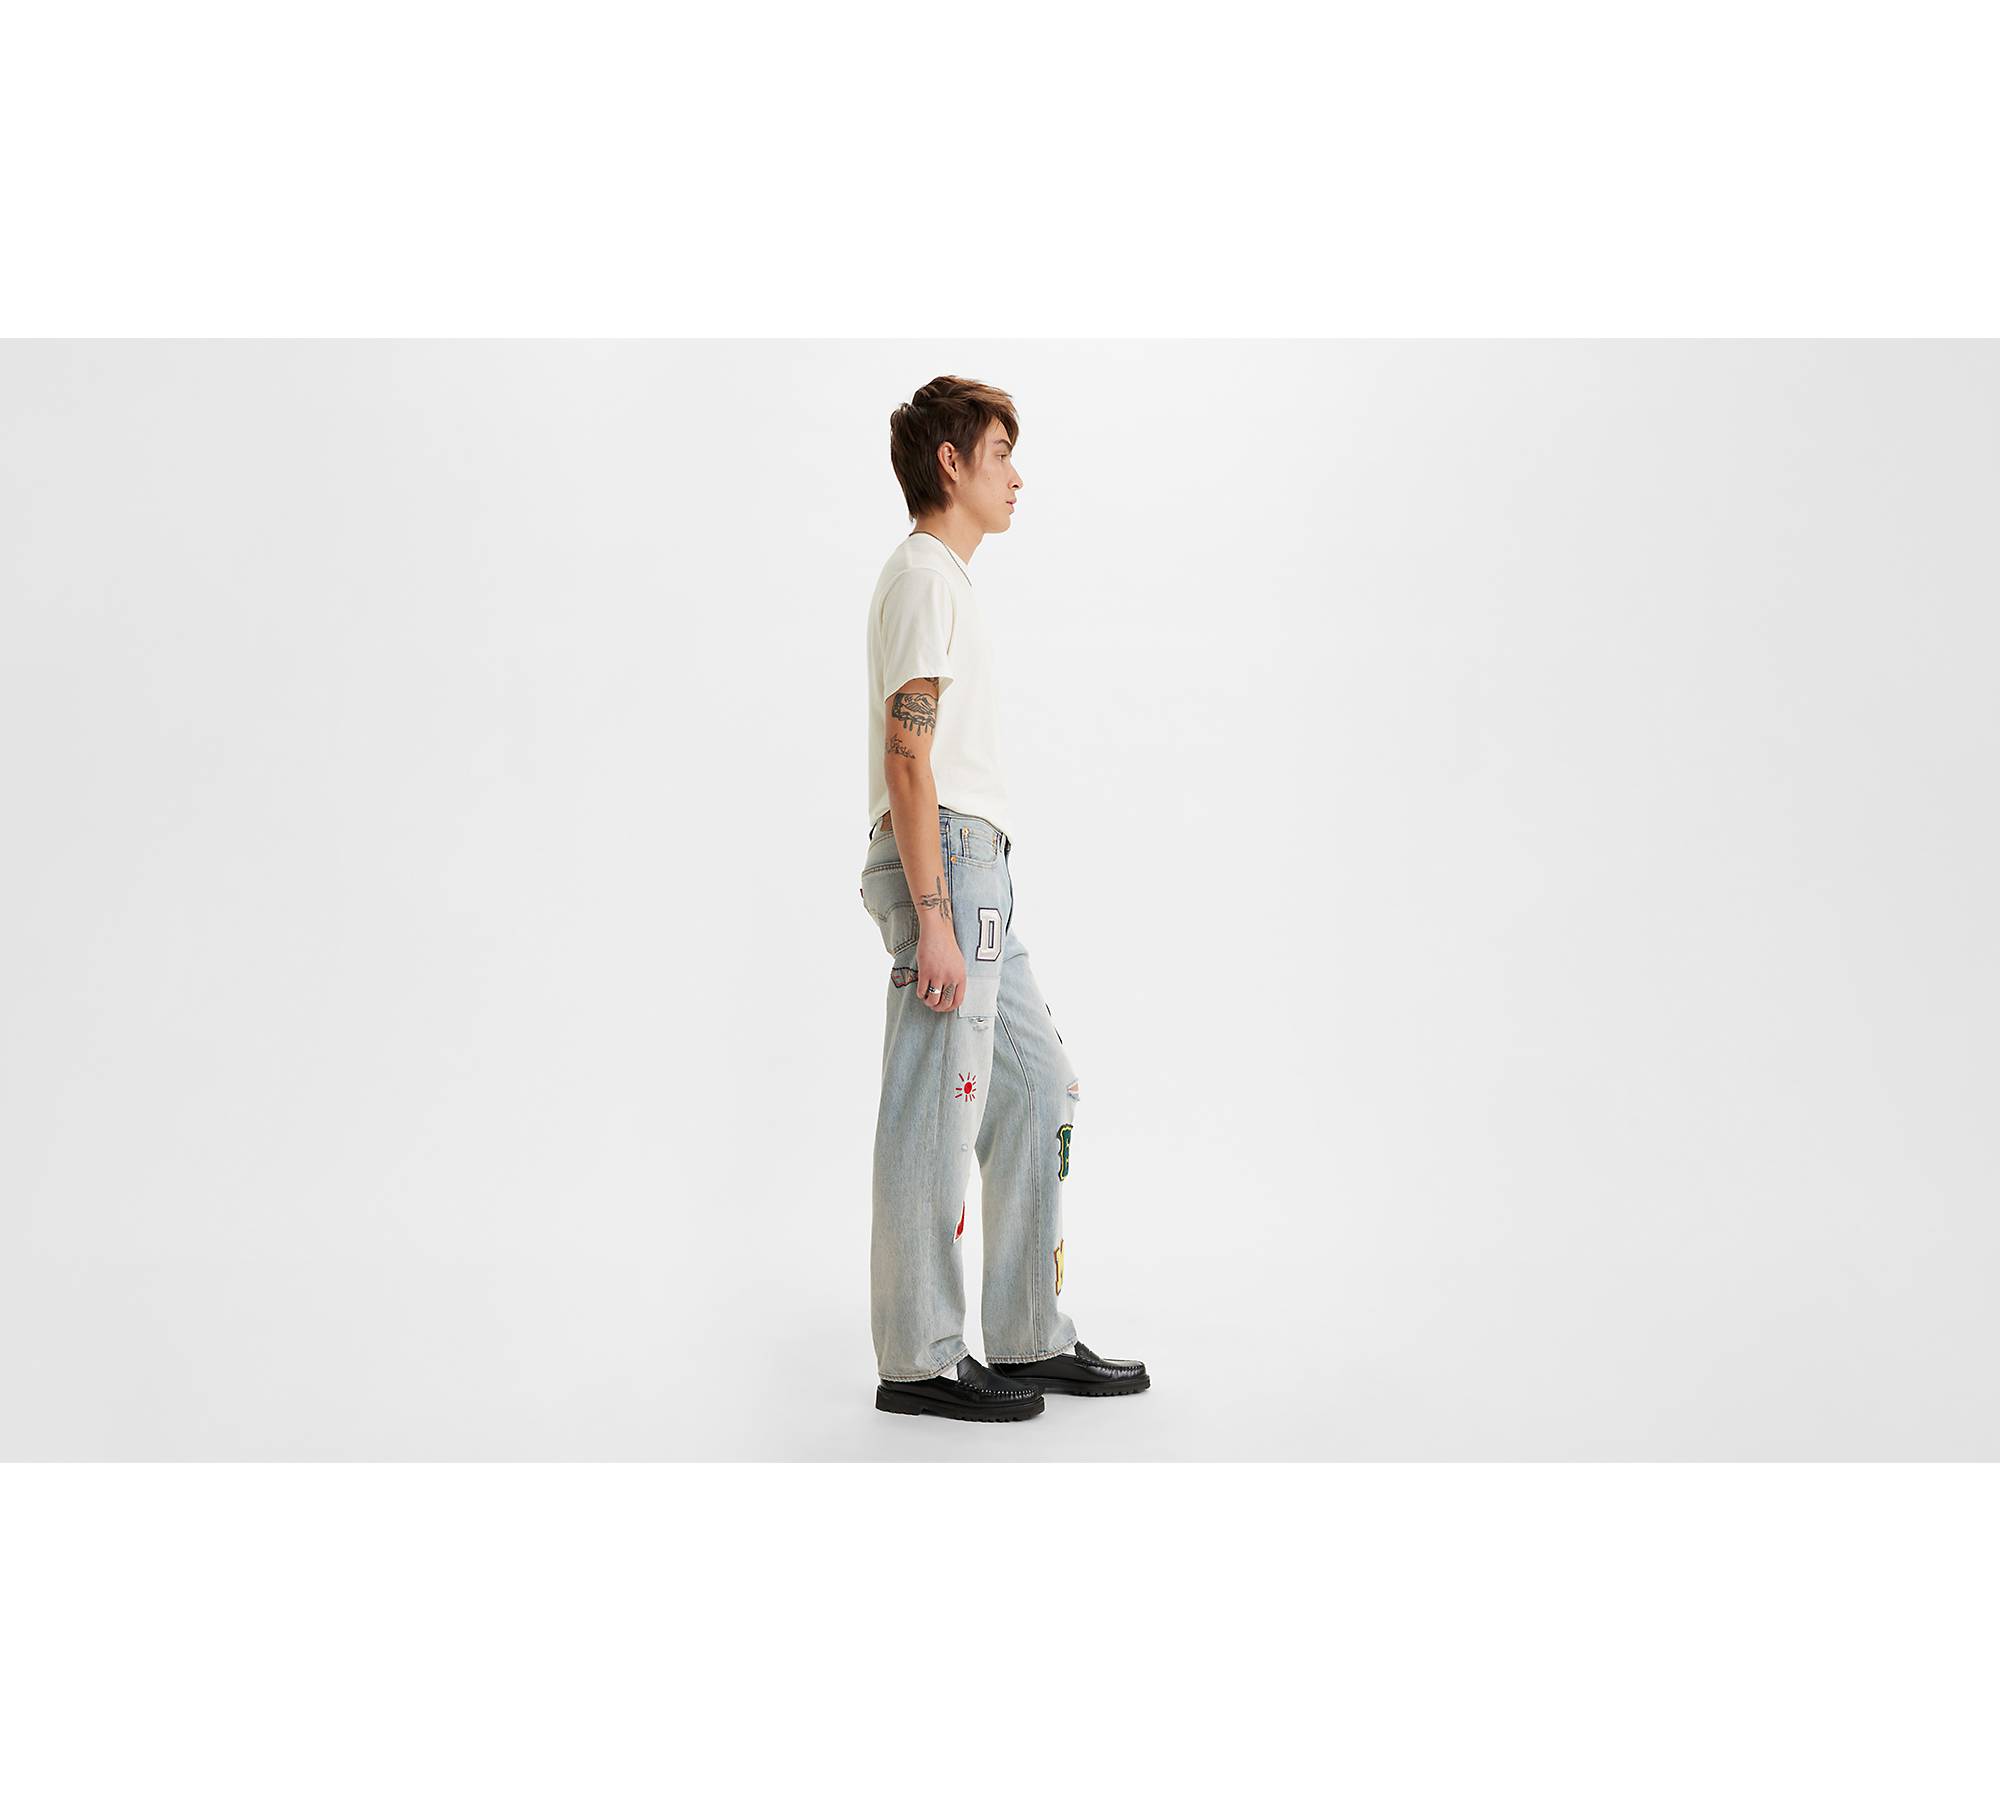 568™ Stay Loose Patched Men's Jeans - Light Wash | Levi's® US